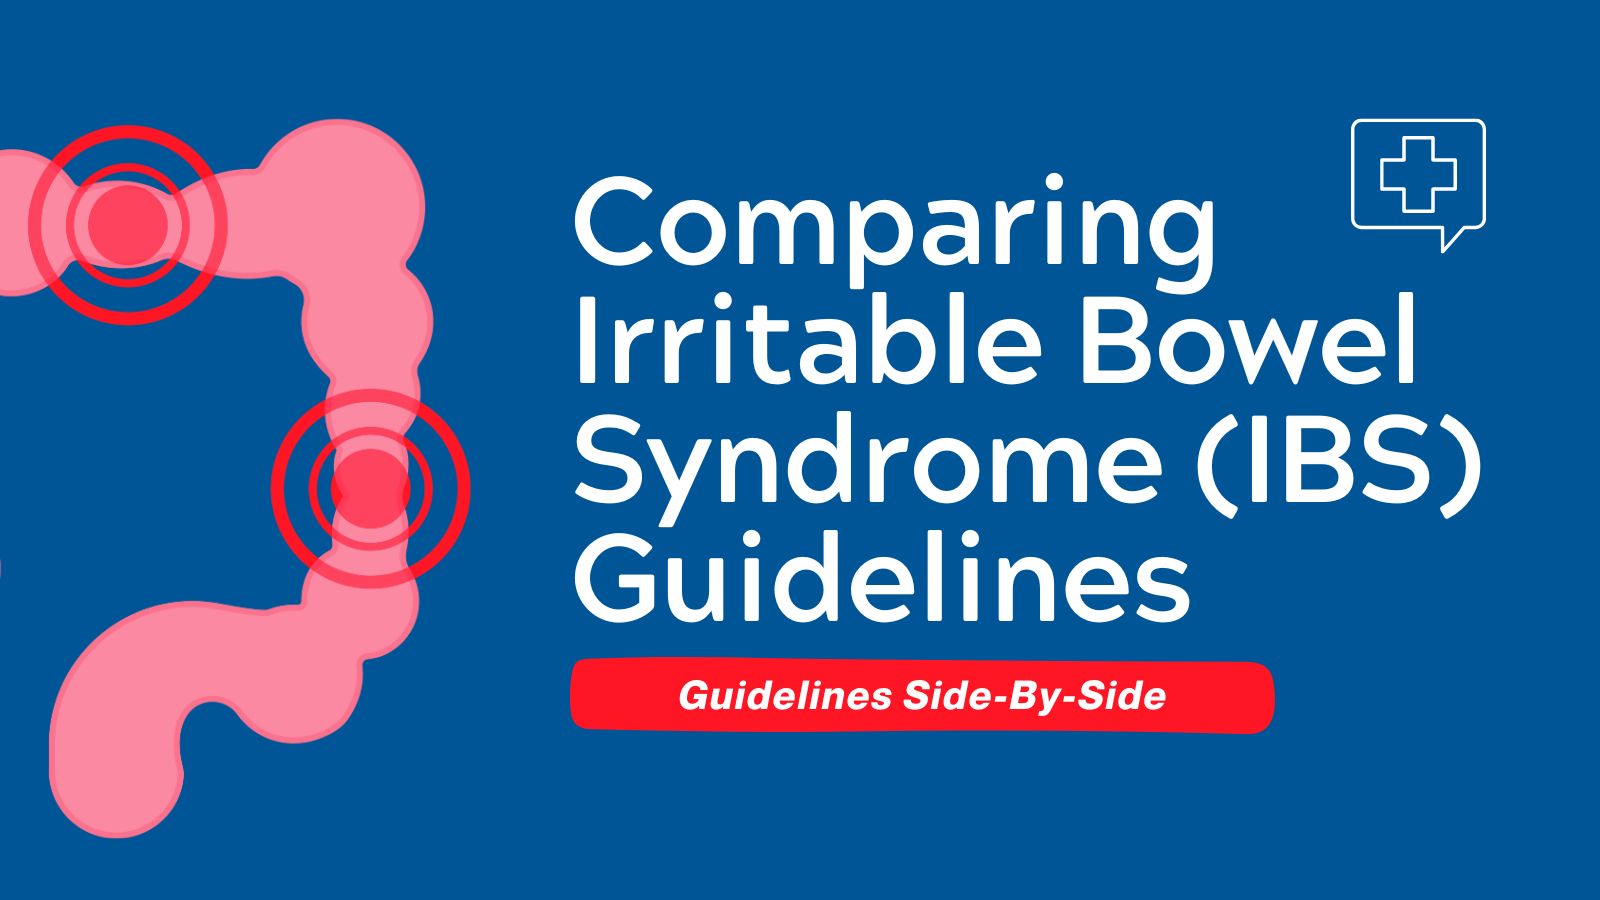 Guidelines Side-By-Side IBS